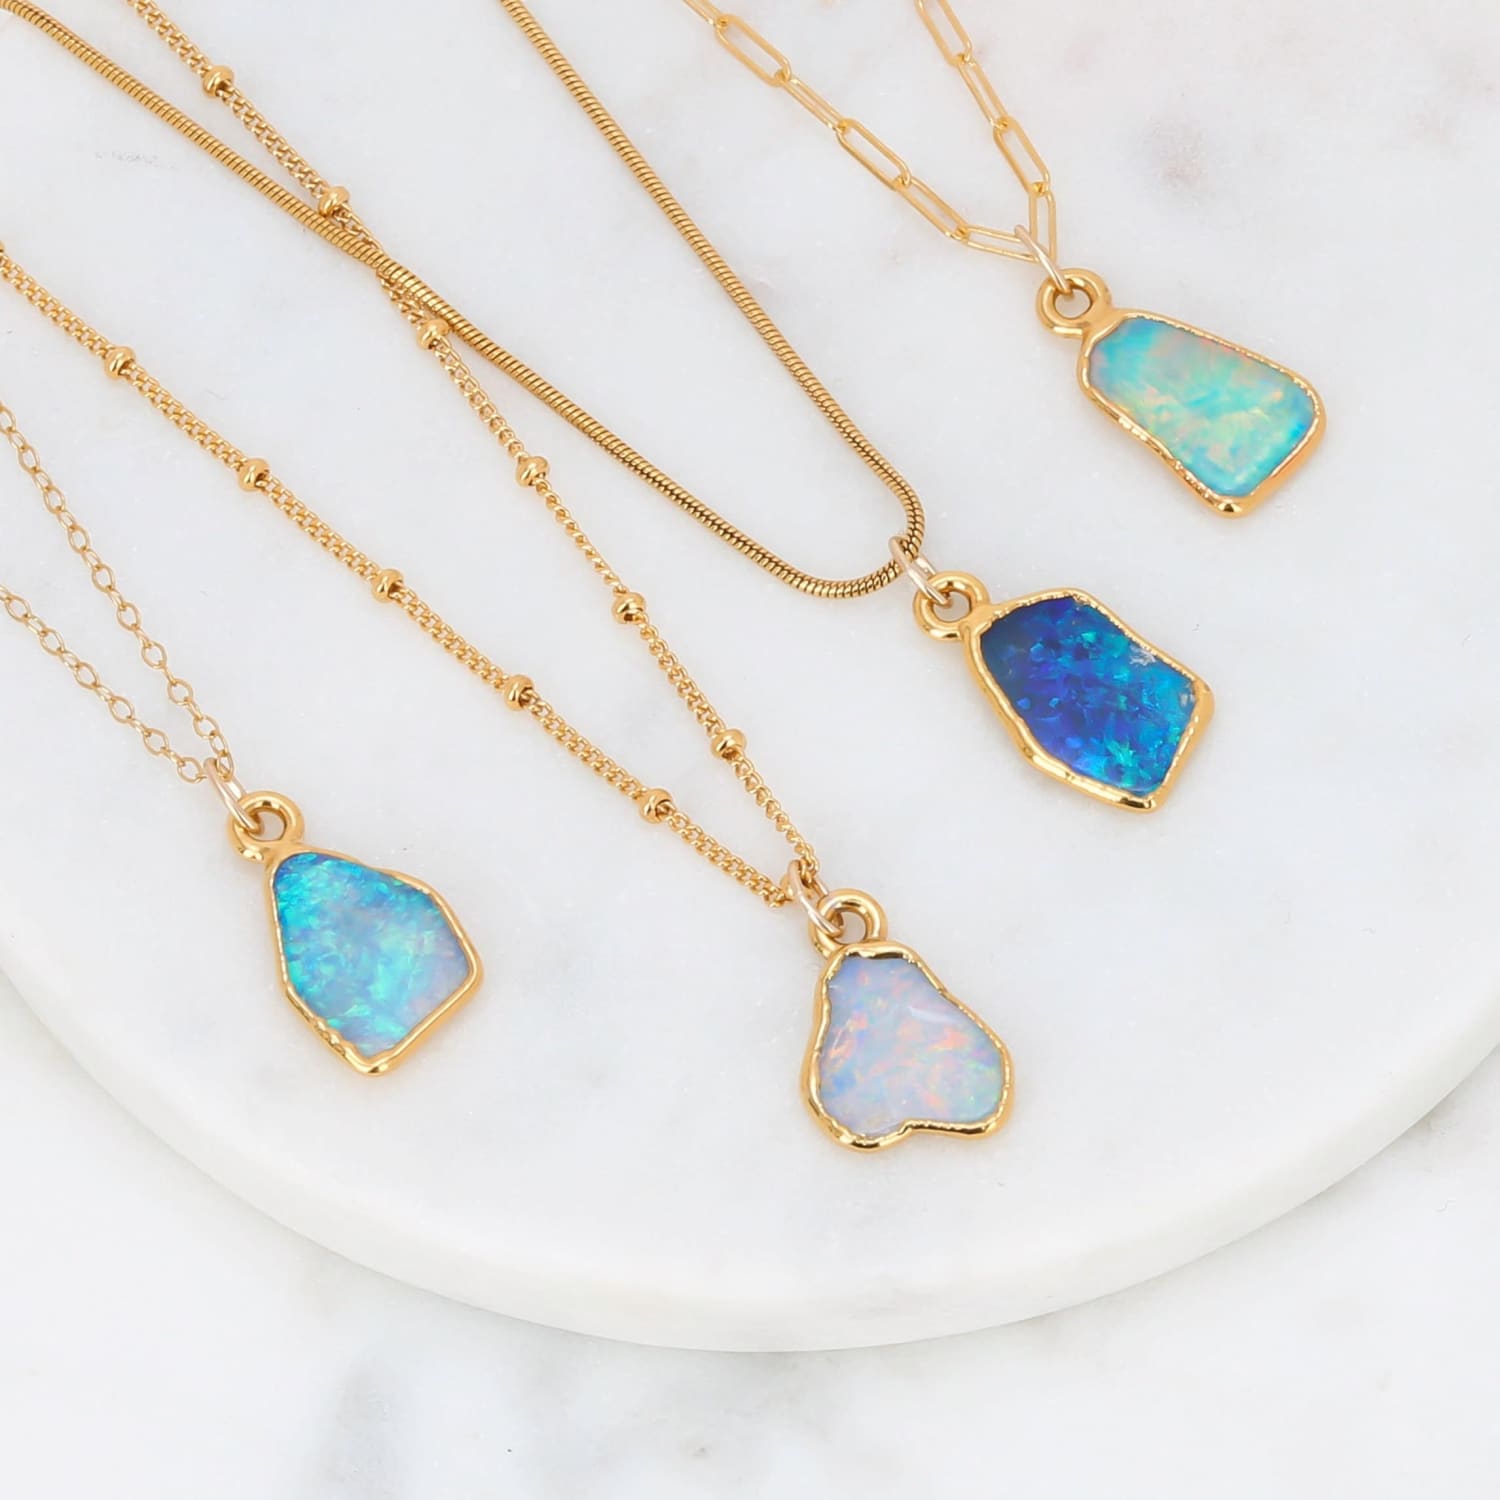 Raw Australian Opal Necklace with Paperclip Chain